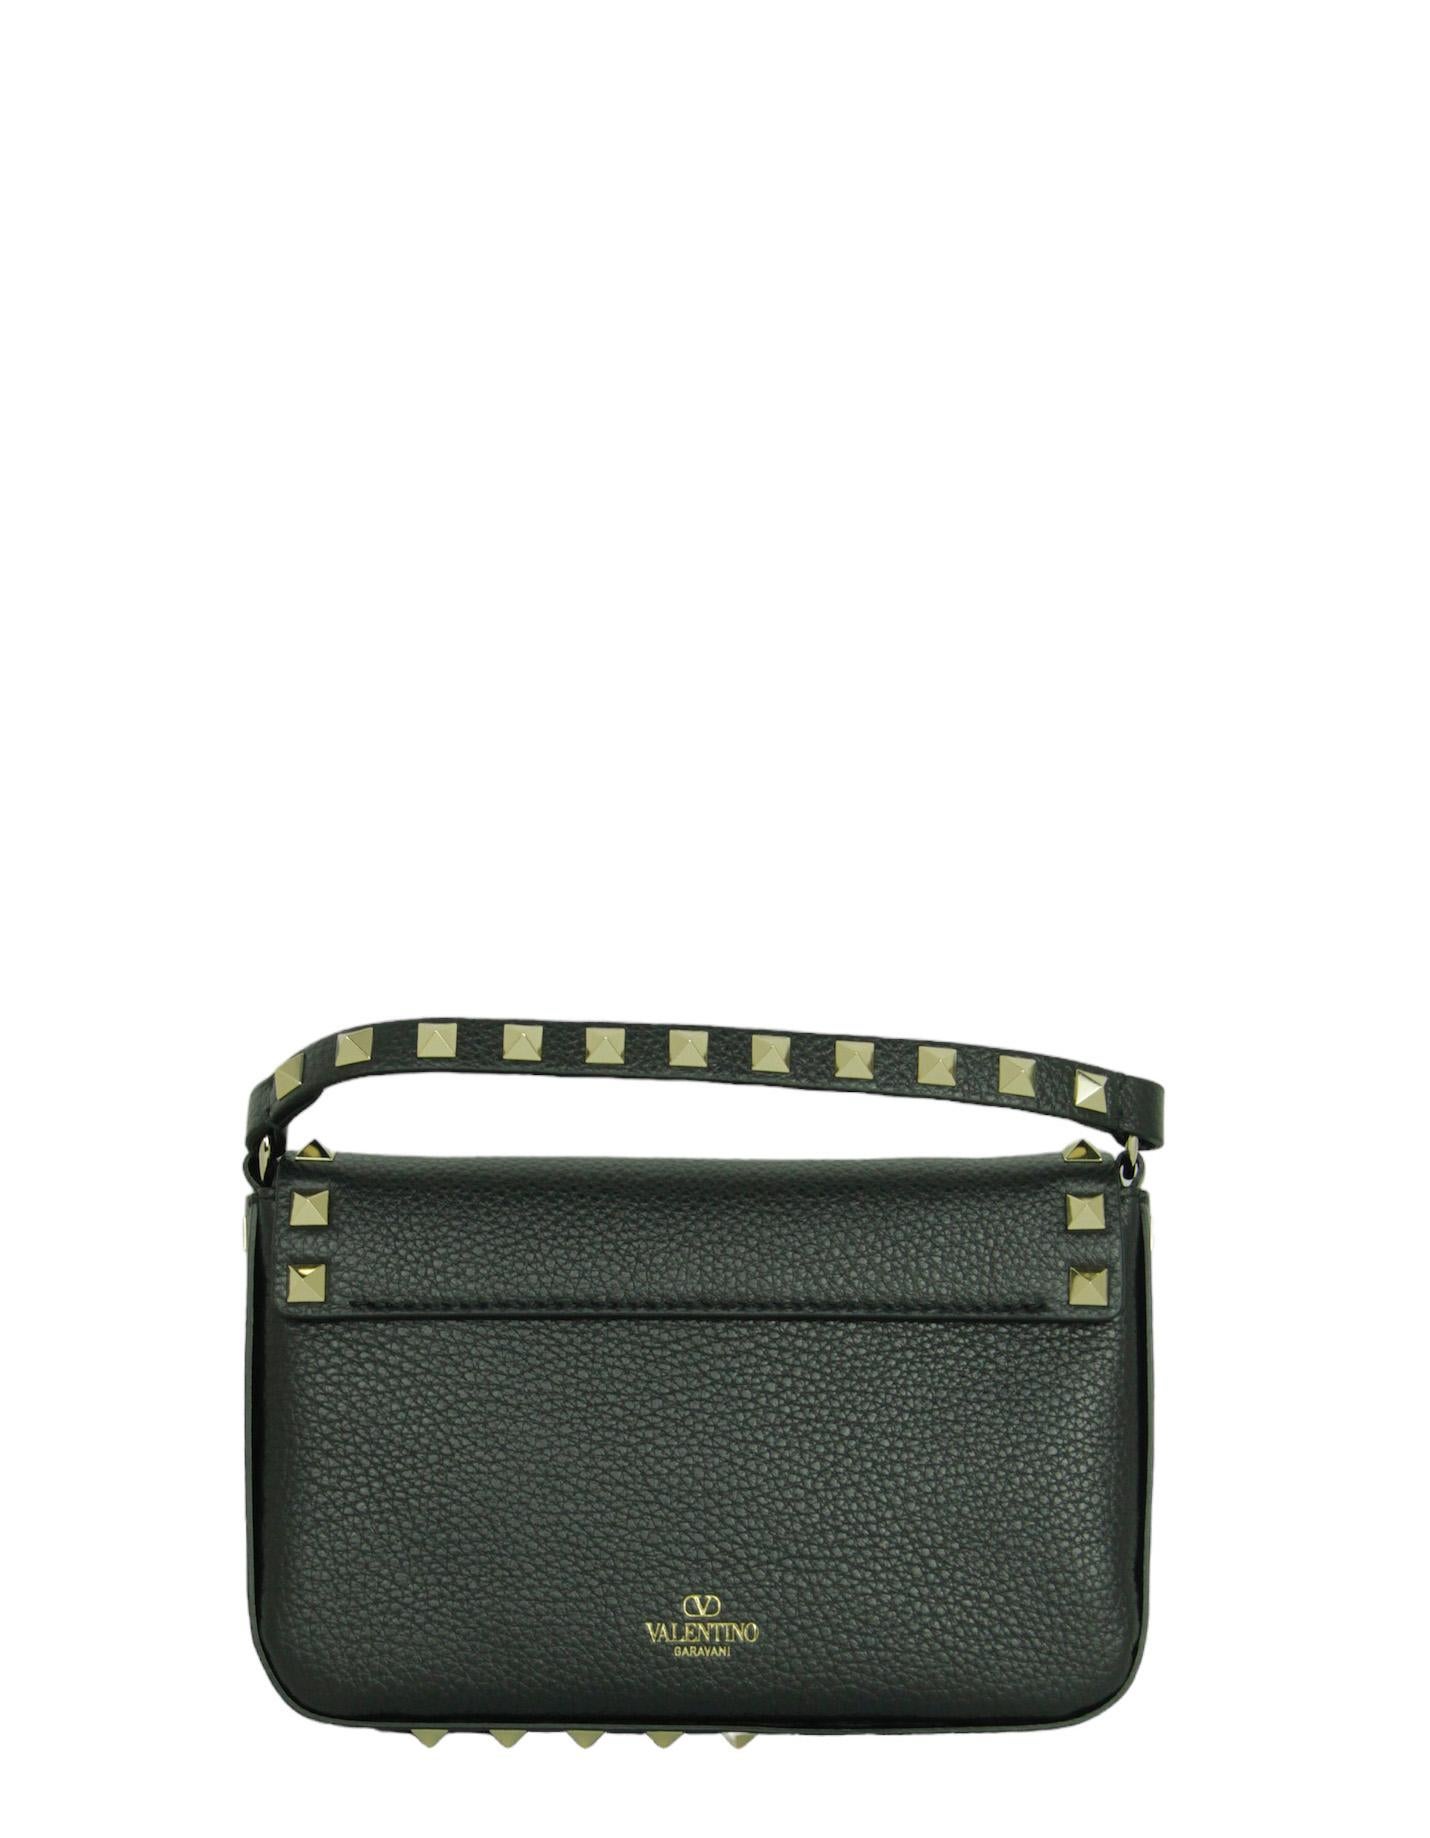 Valentino Black Leather Rockstud Top Handle Crossbody Bag In New Condition For Sale In New York, NY